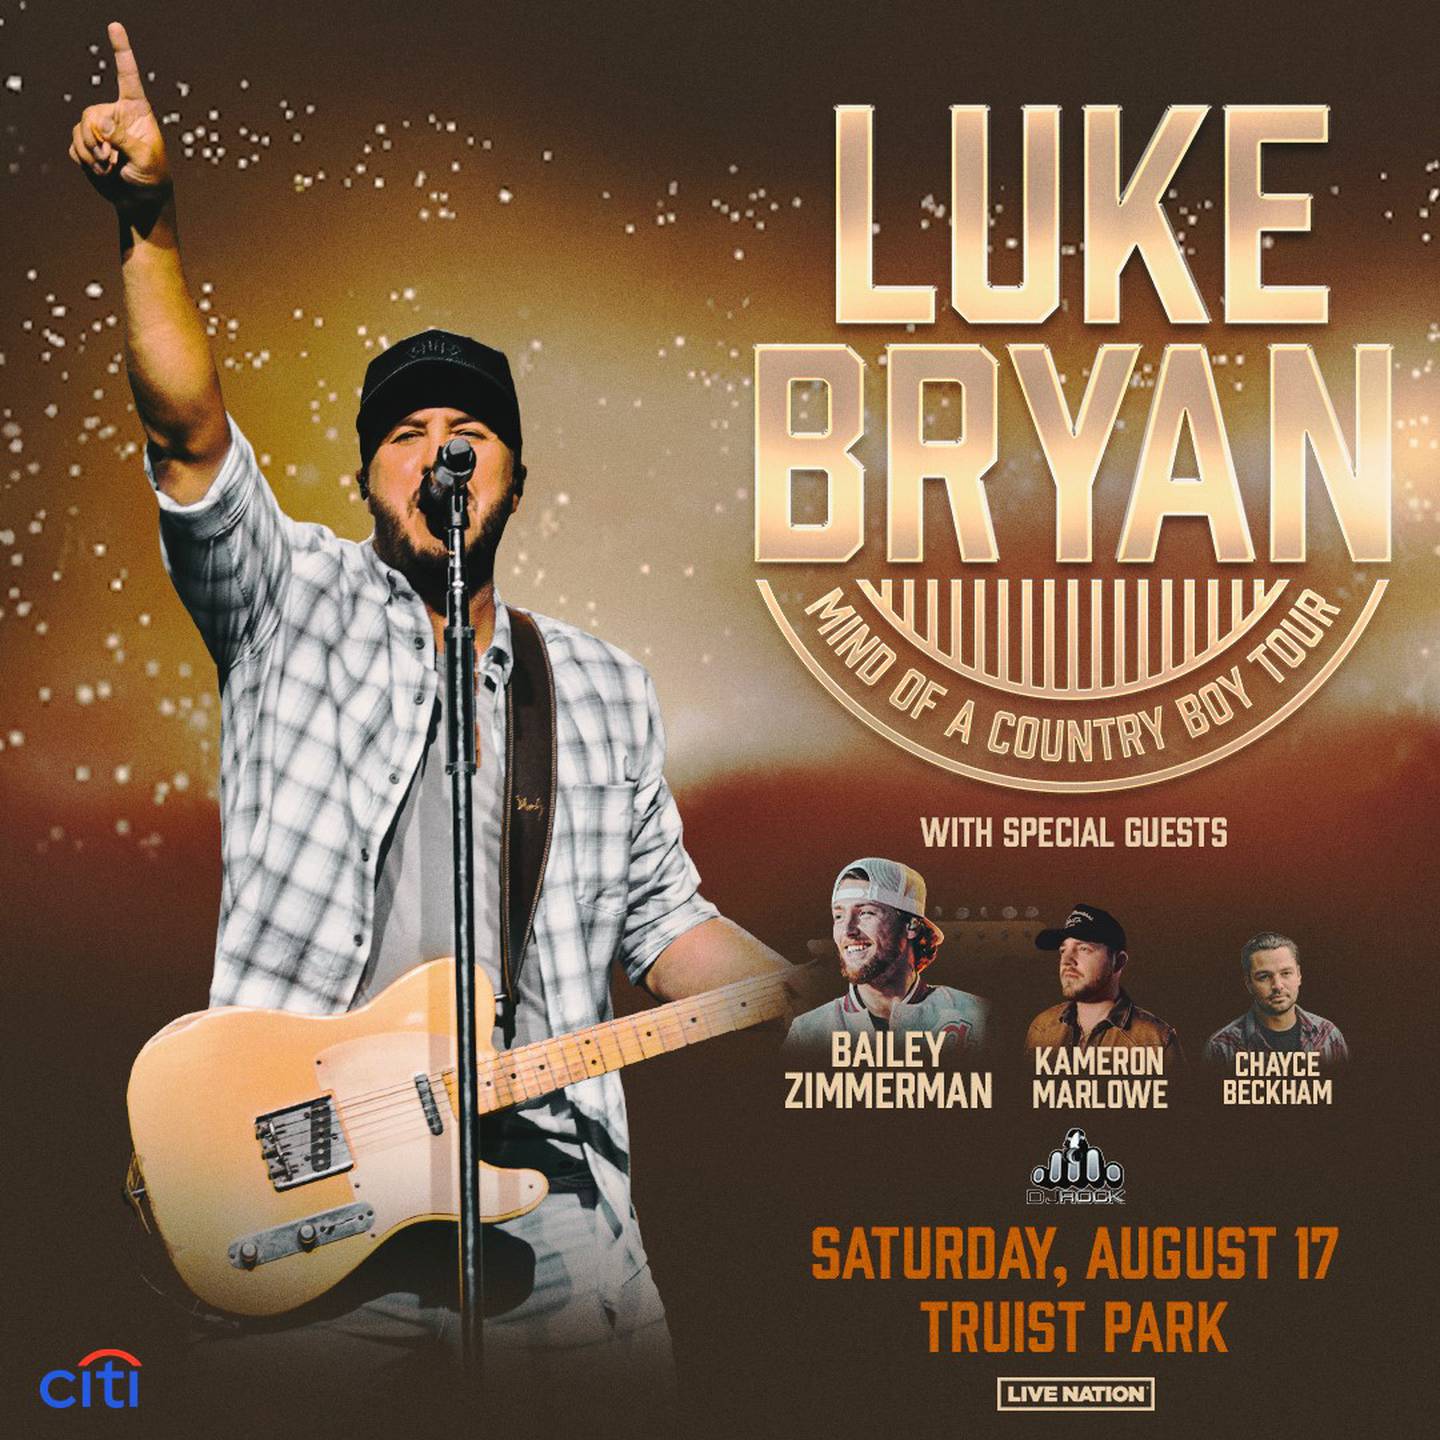 Listen for Your Chance to Win Tickets to See Luke Bryan!